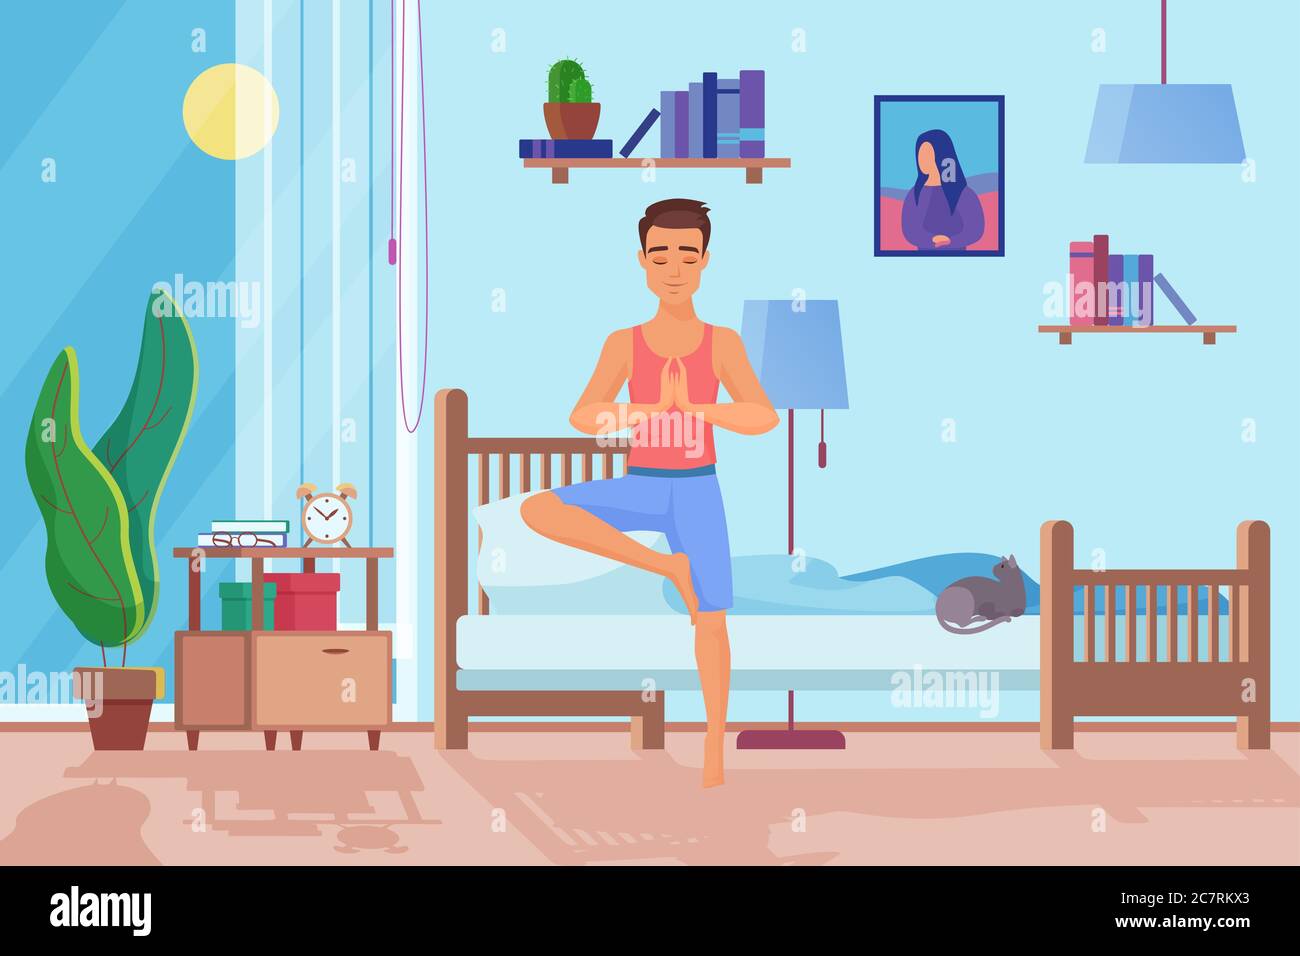 Morning exercises flat vector illustration. Healthy lifestyle, man doing sport, training, workout at home. Smiling male cartoon character activity, cat sleeping on bed. Guys room interior design Stock Vector